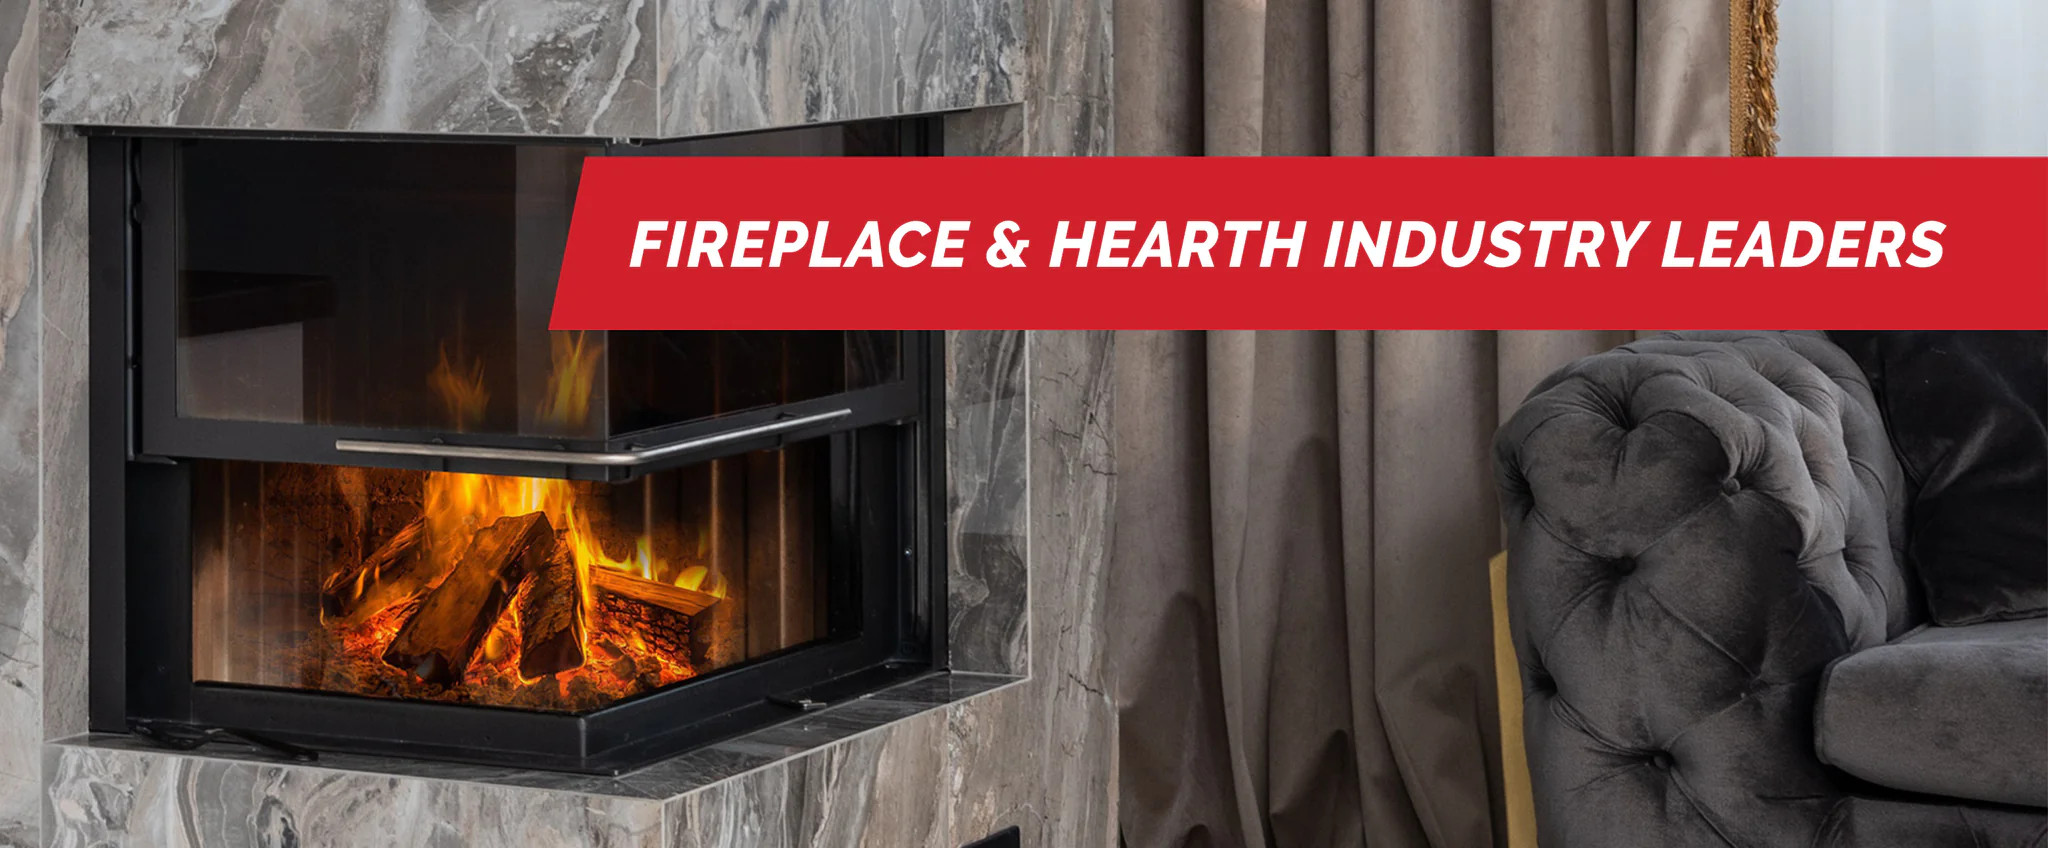 fireplace and hearth industry leaders